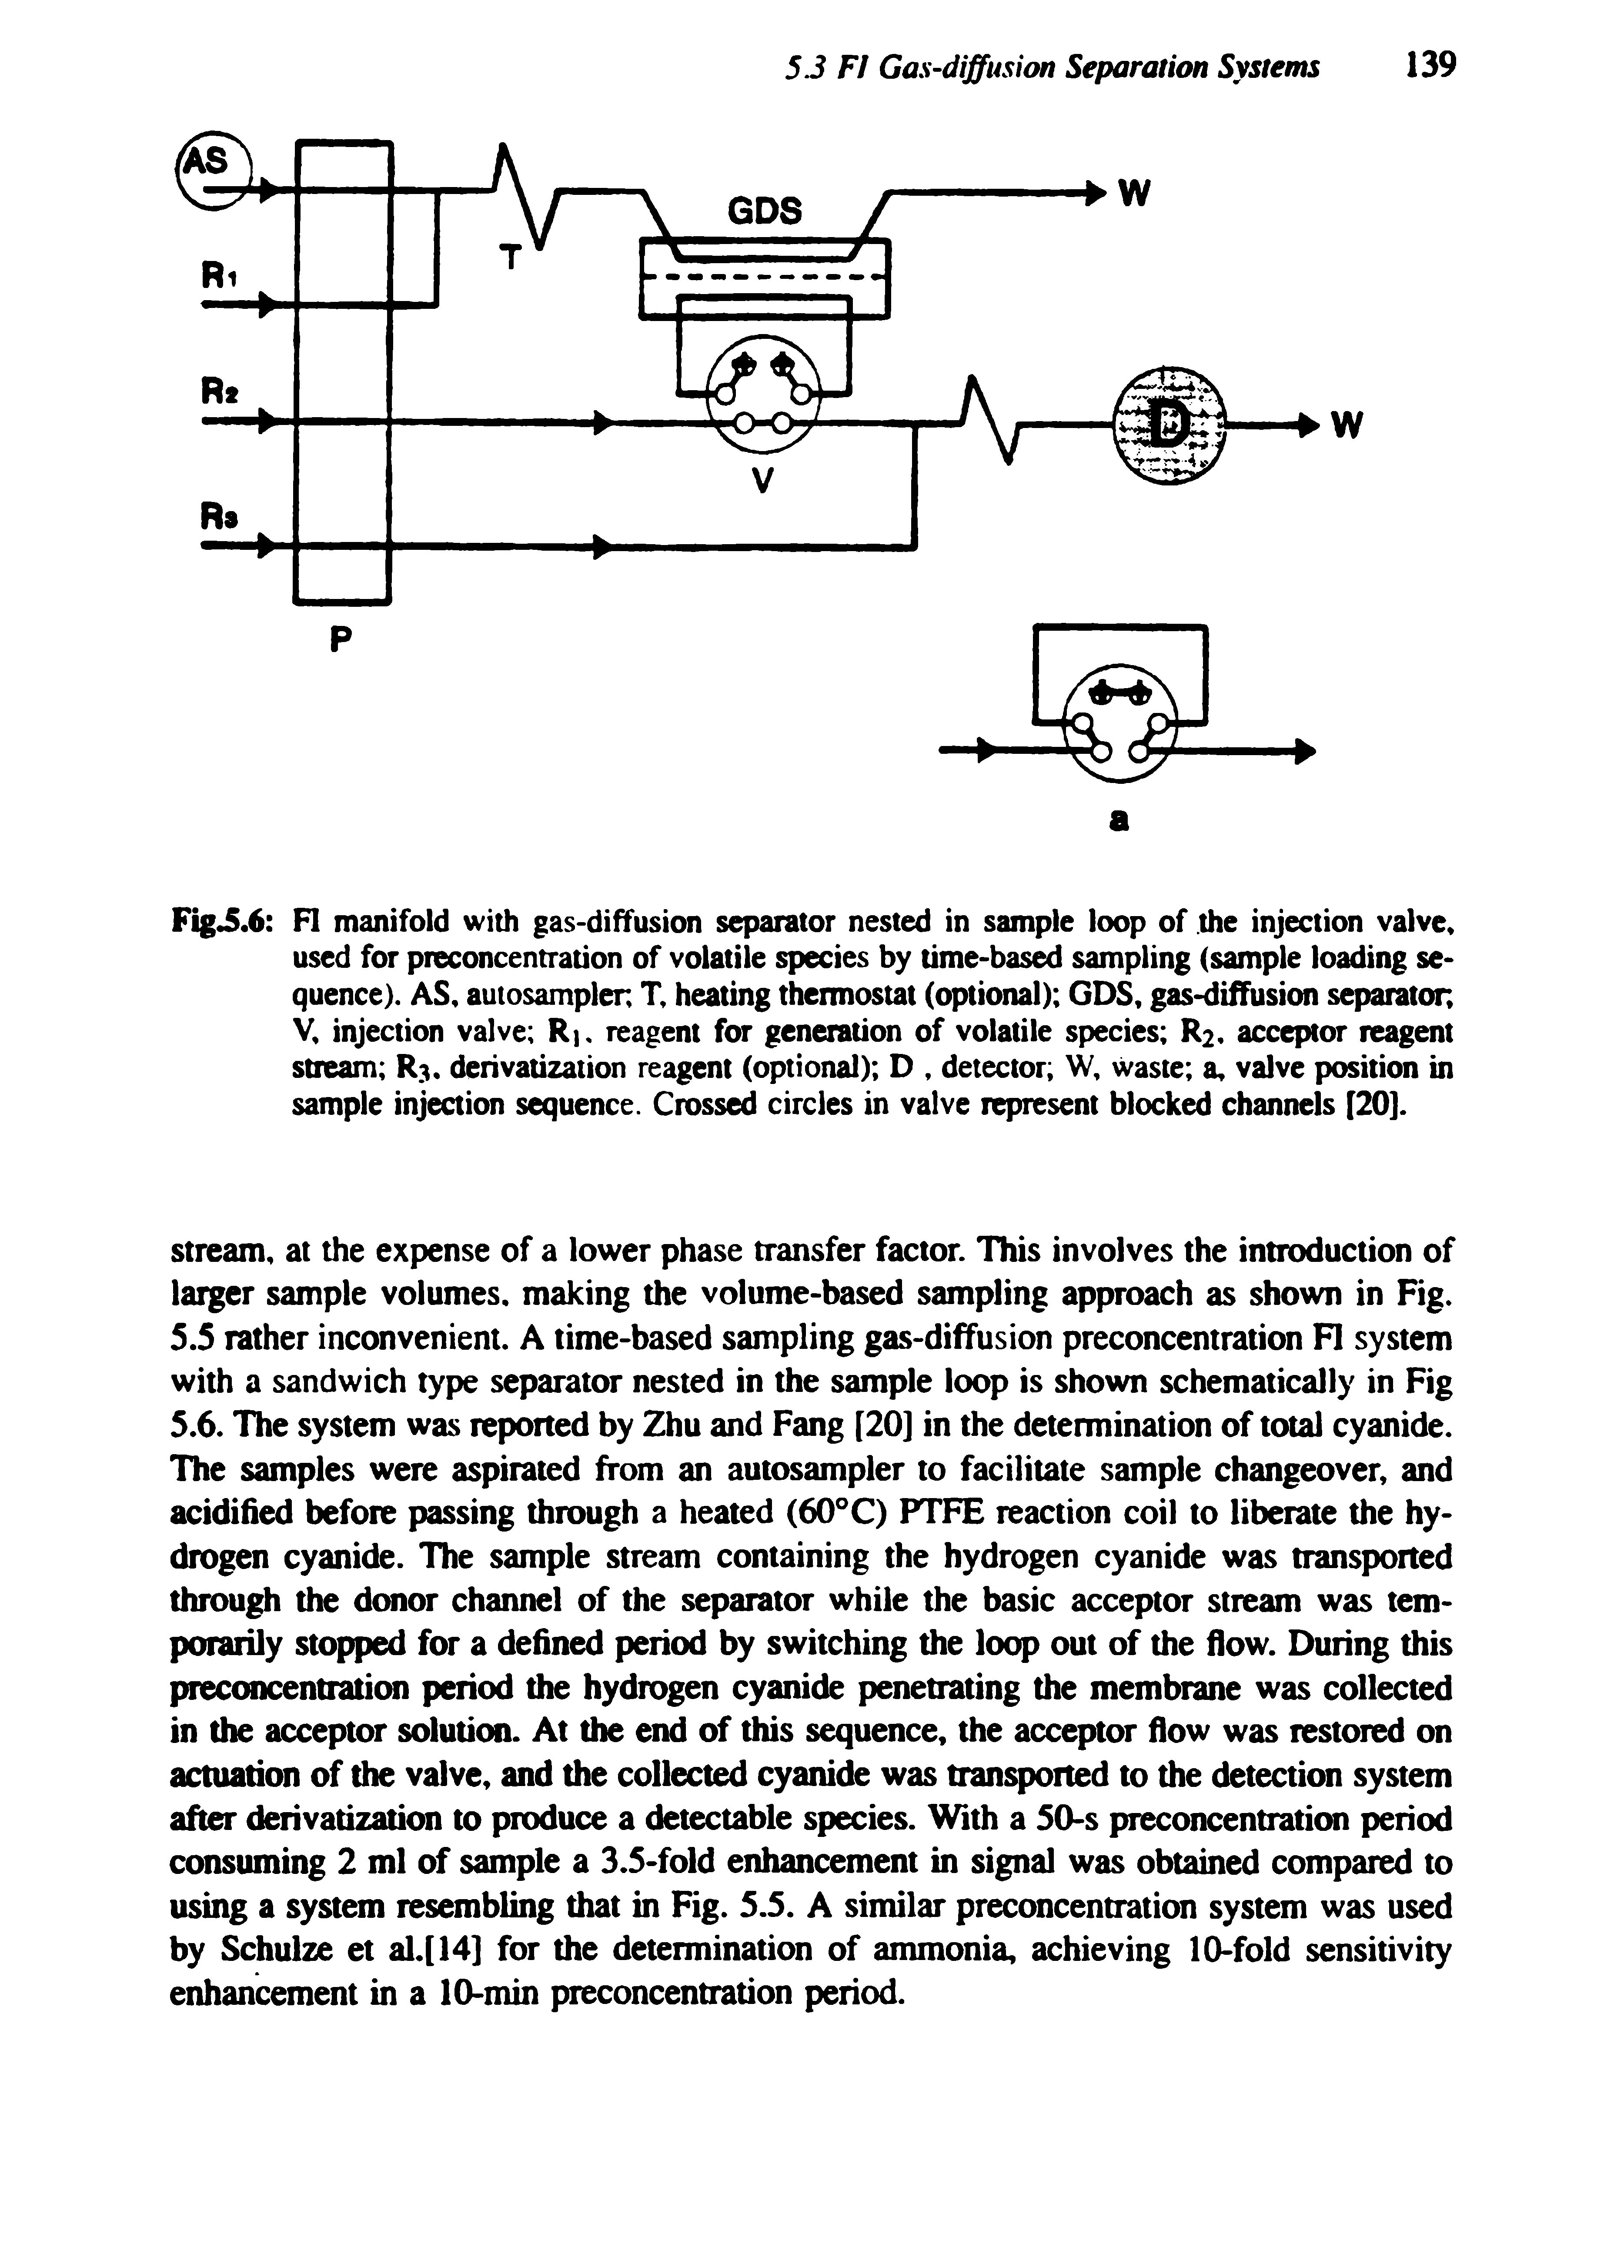 Fig. 6 FI manifold with gas-diffusion separator nested in sample loop of the injection valve used for preconcentration of volatile species by time-bas sampling (sample loading sequence). AS, autosampler, T, heating thermostat (optional) CDS, gas-diffusion separator, V, injection valve Ri, reagent for generation of volatile species R2. acceptor reagent stream R3. derivatization reagent (optional) D, detector W, waste a, valve position in sample injection sequence. Crossed circles in valve represent blocked channels [20].